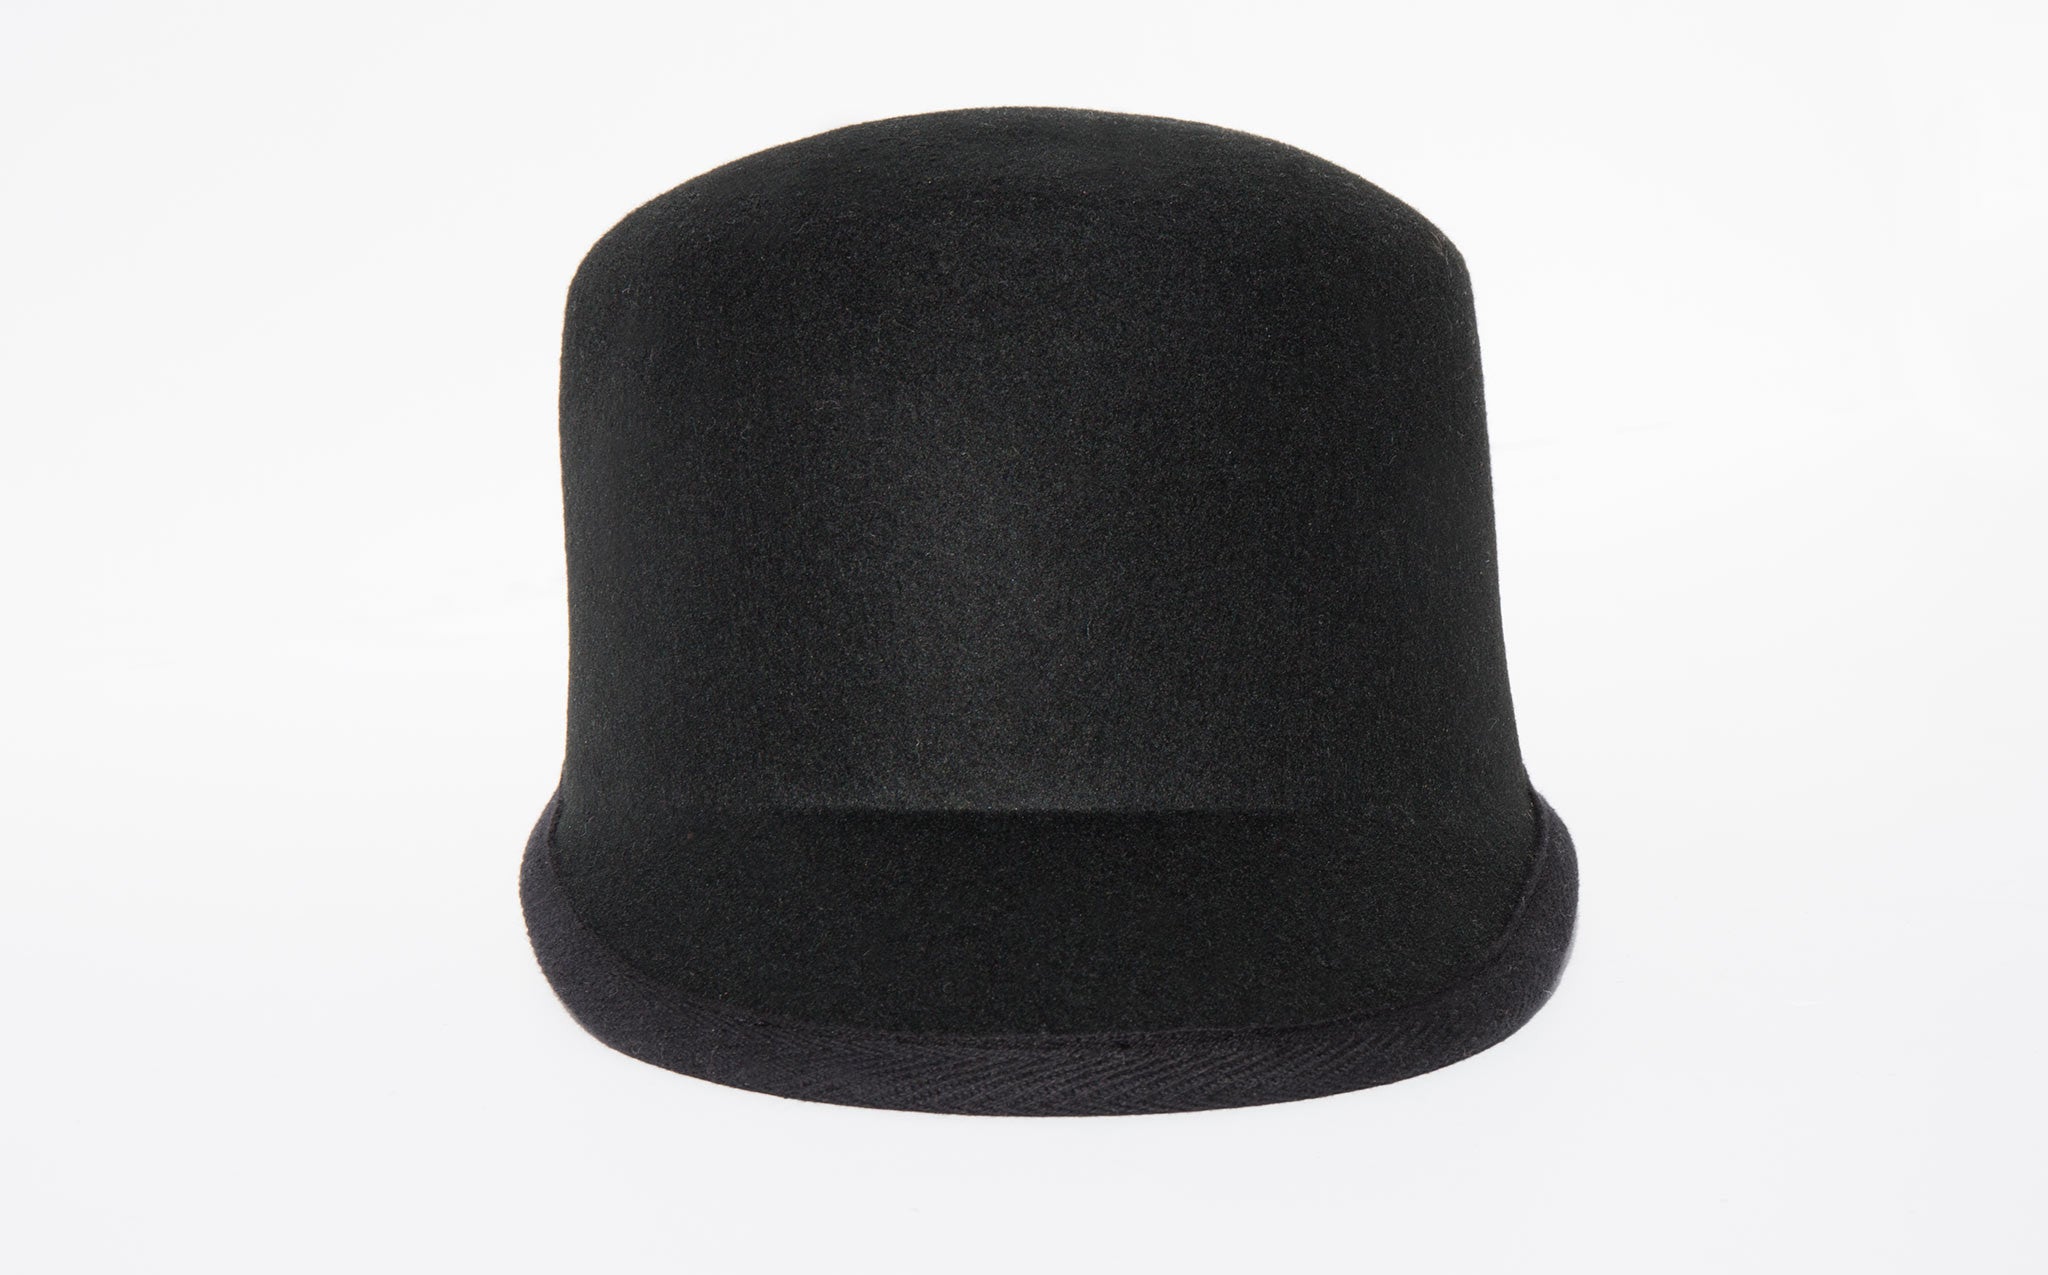 Clyde Black Wool Conductor Hat